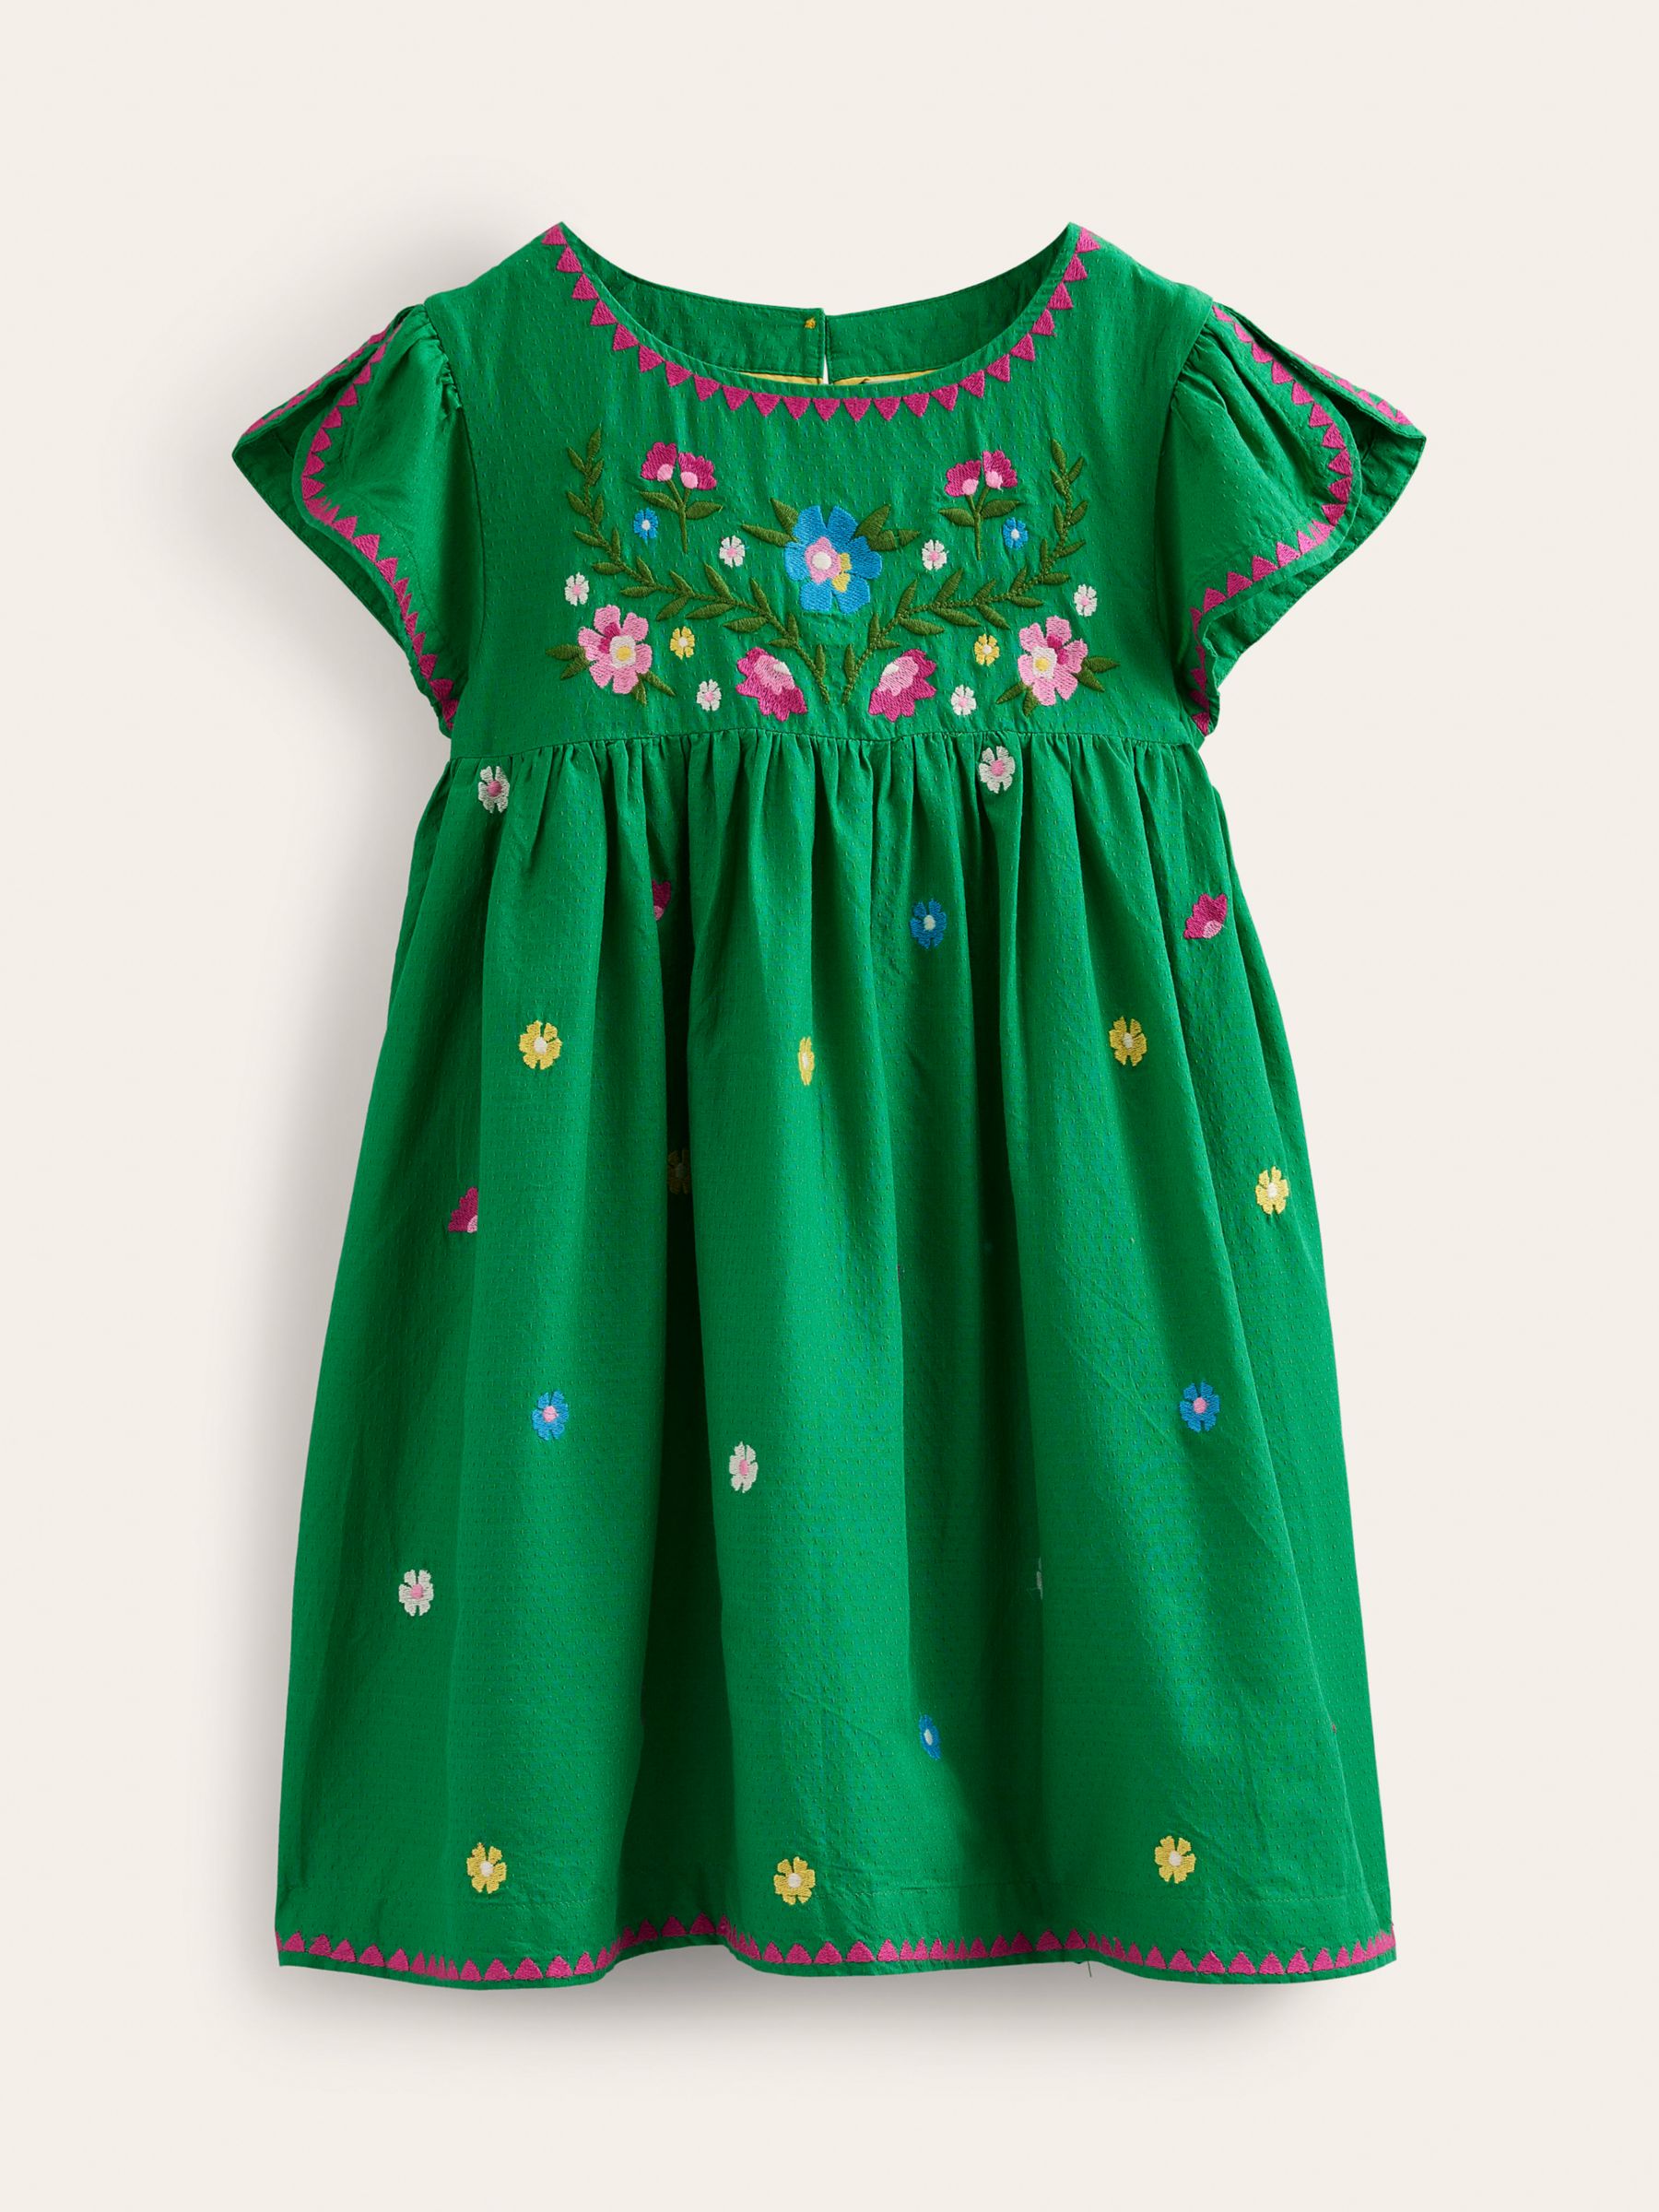 Embroidered Cord Dress Pop Peony Festive Boden US, 53% OFF